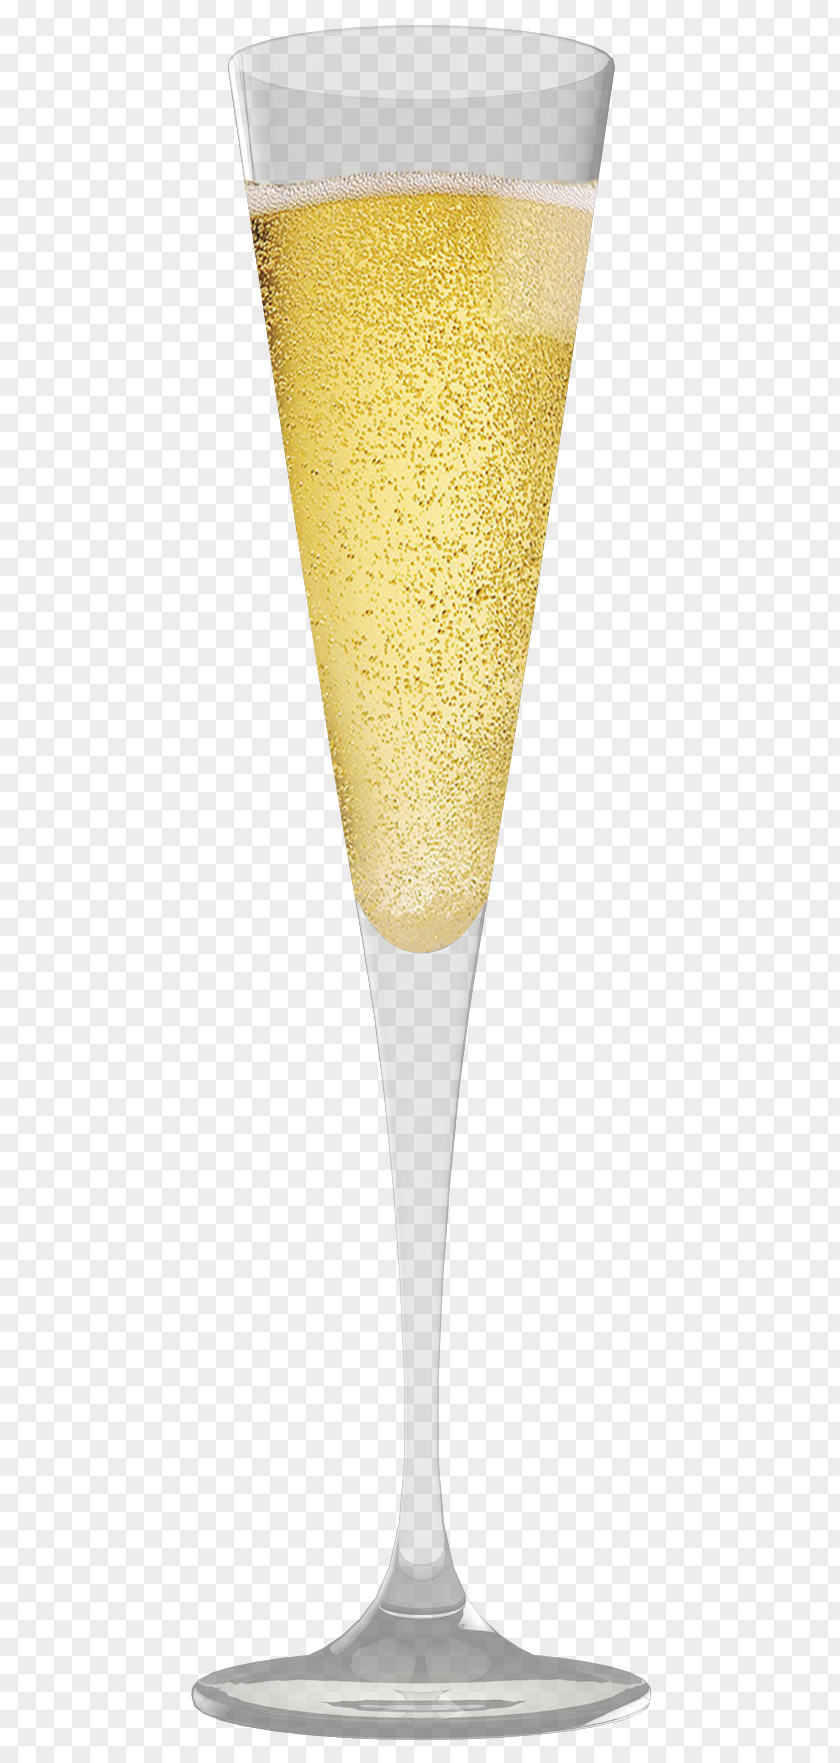 Champagne Wine Glass Cocktail Clip Art PNG